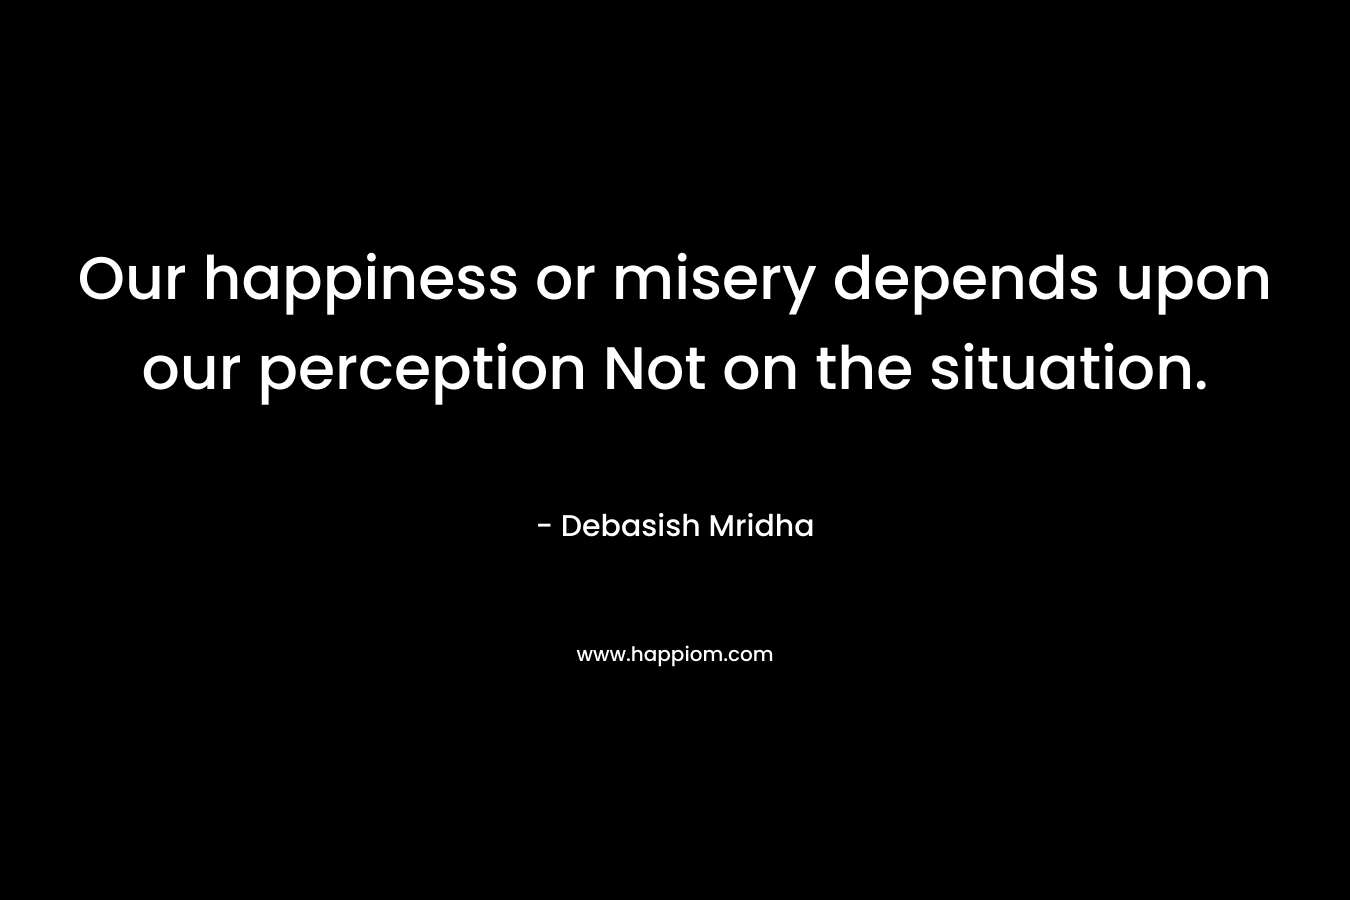 Our happiness or misery depends upon our perception Not on the situation.